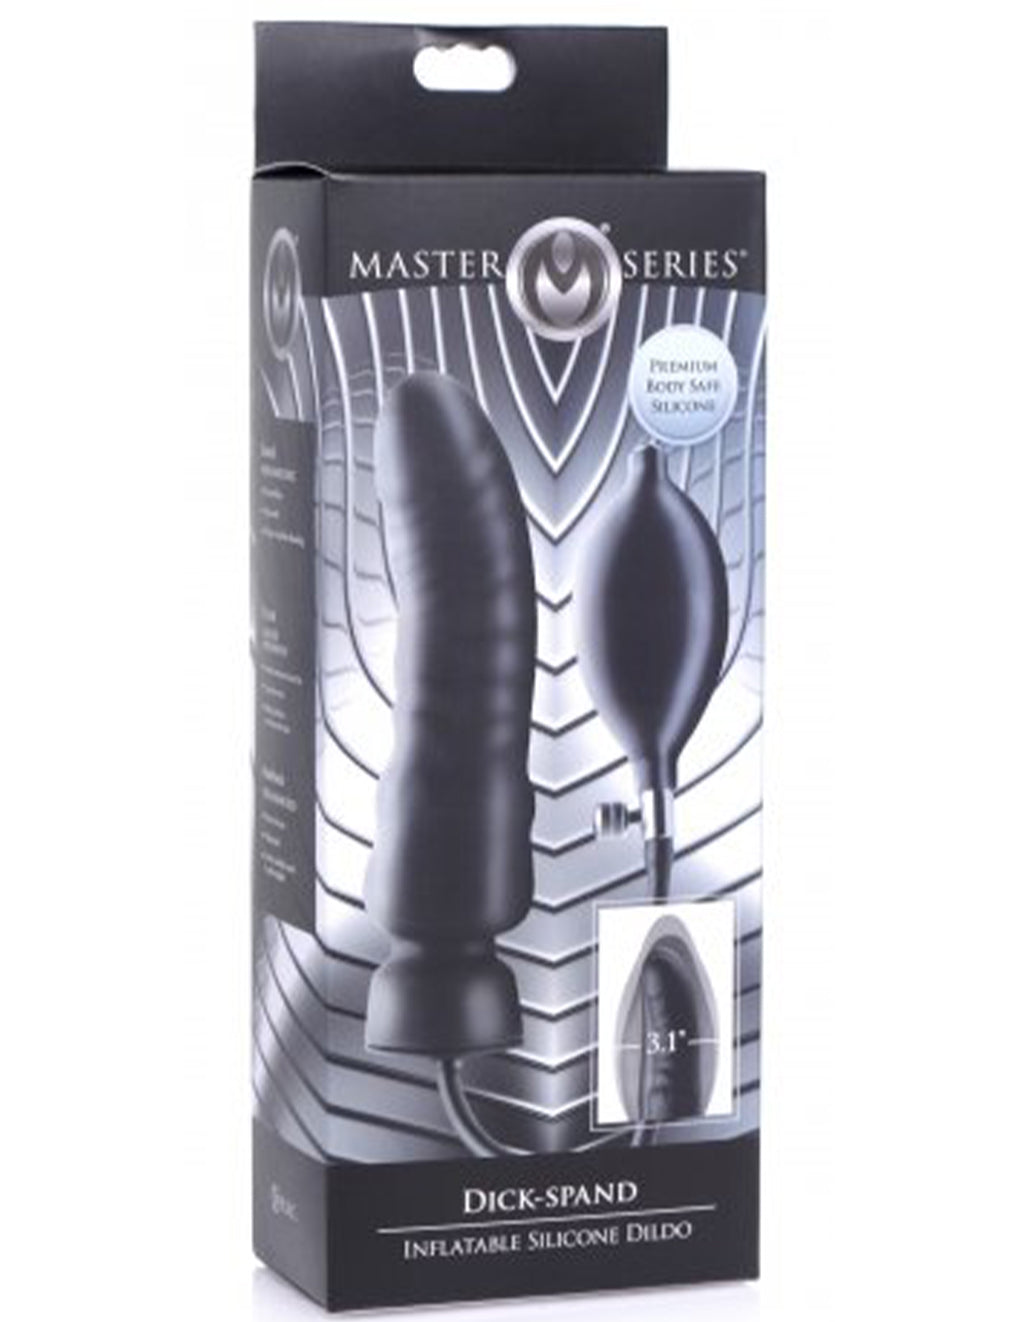 Master Series Dick-Spand Dildo- Package